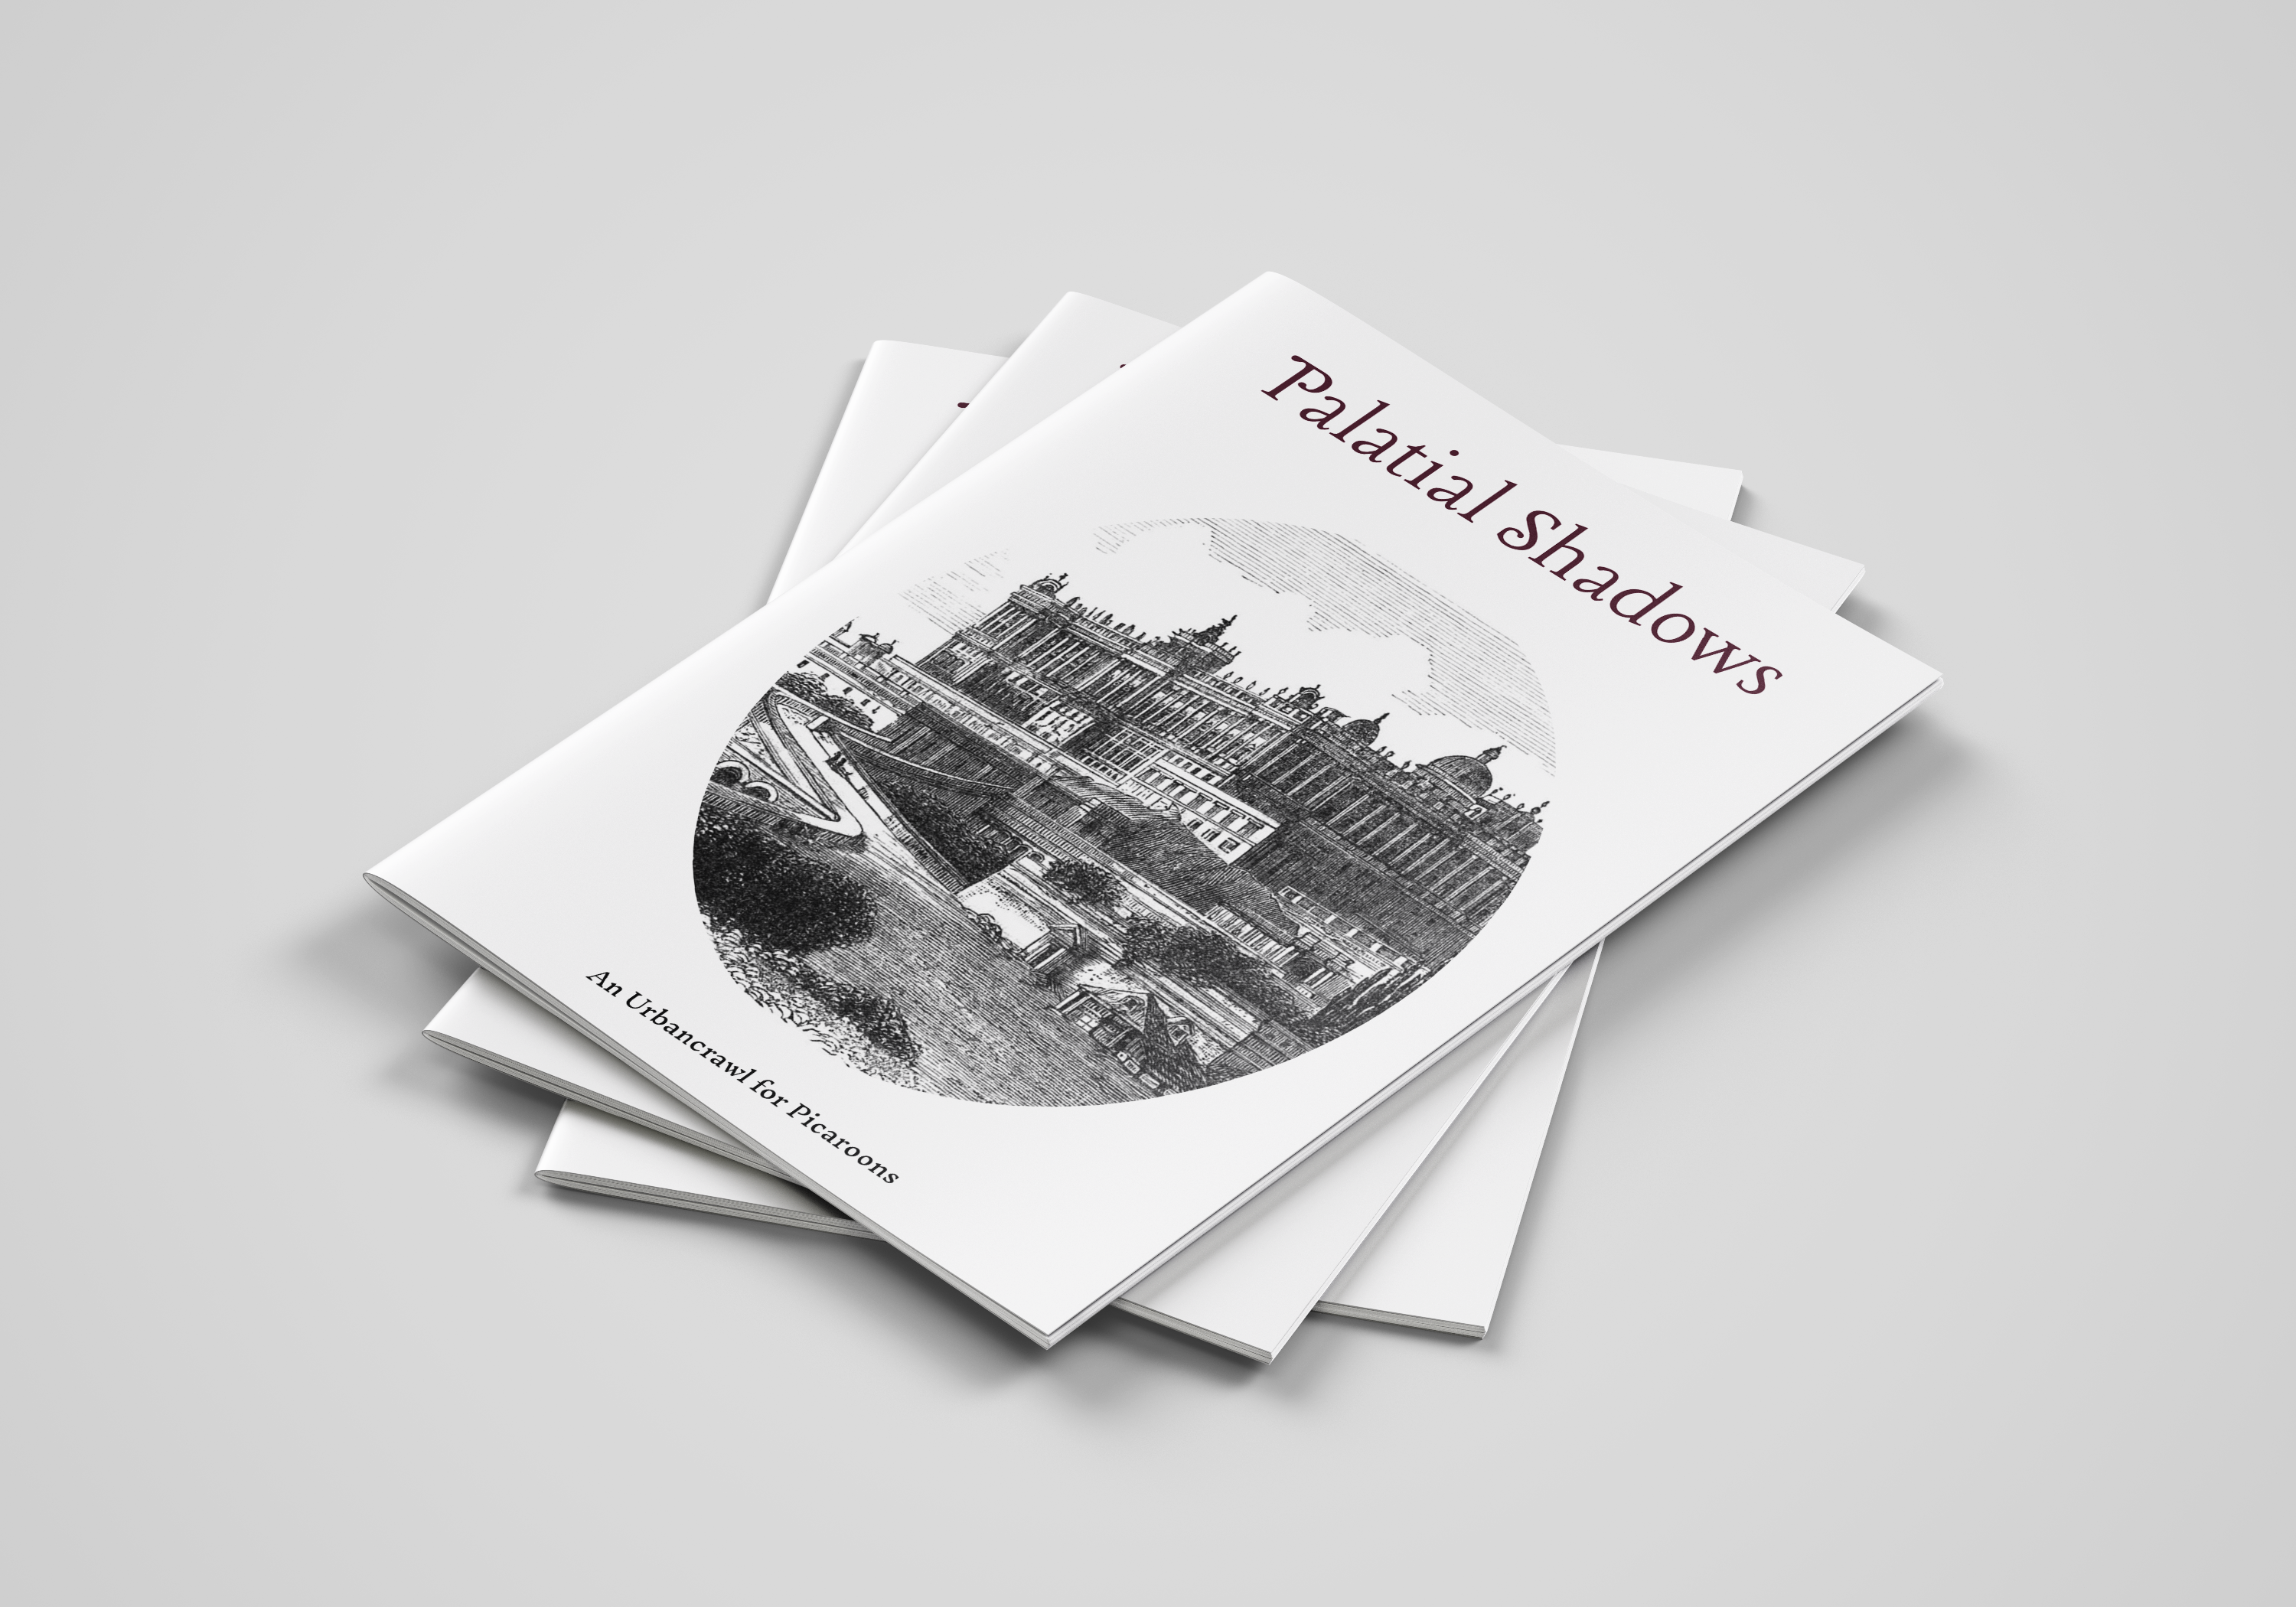 Mockup of the Palatial Shadows zine, featuring an illustration of an opulent Palace set upon a hill overlooking a town